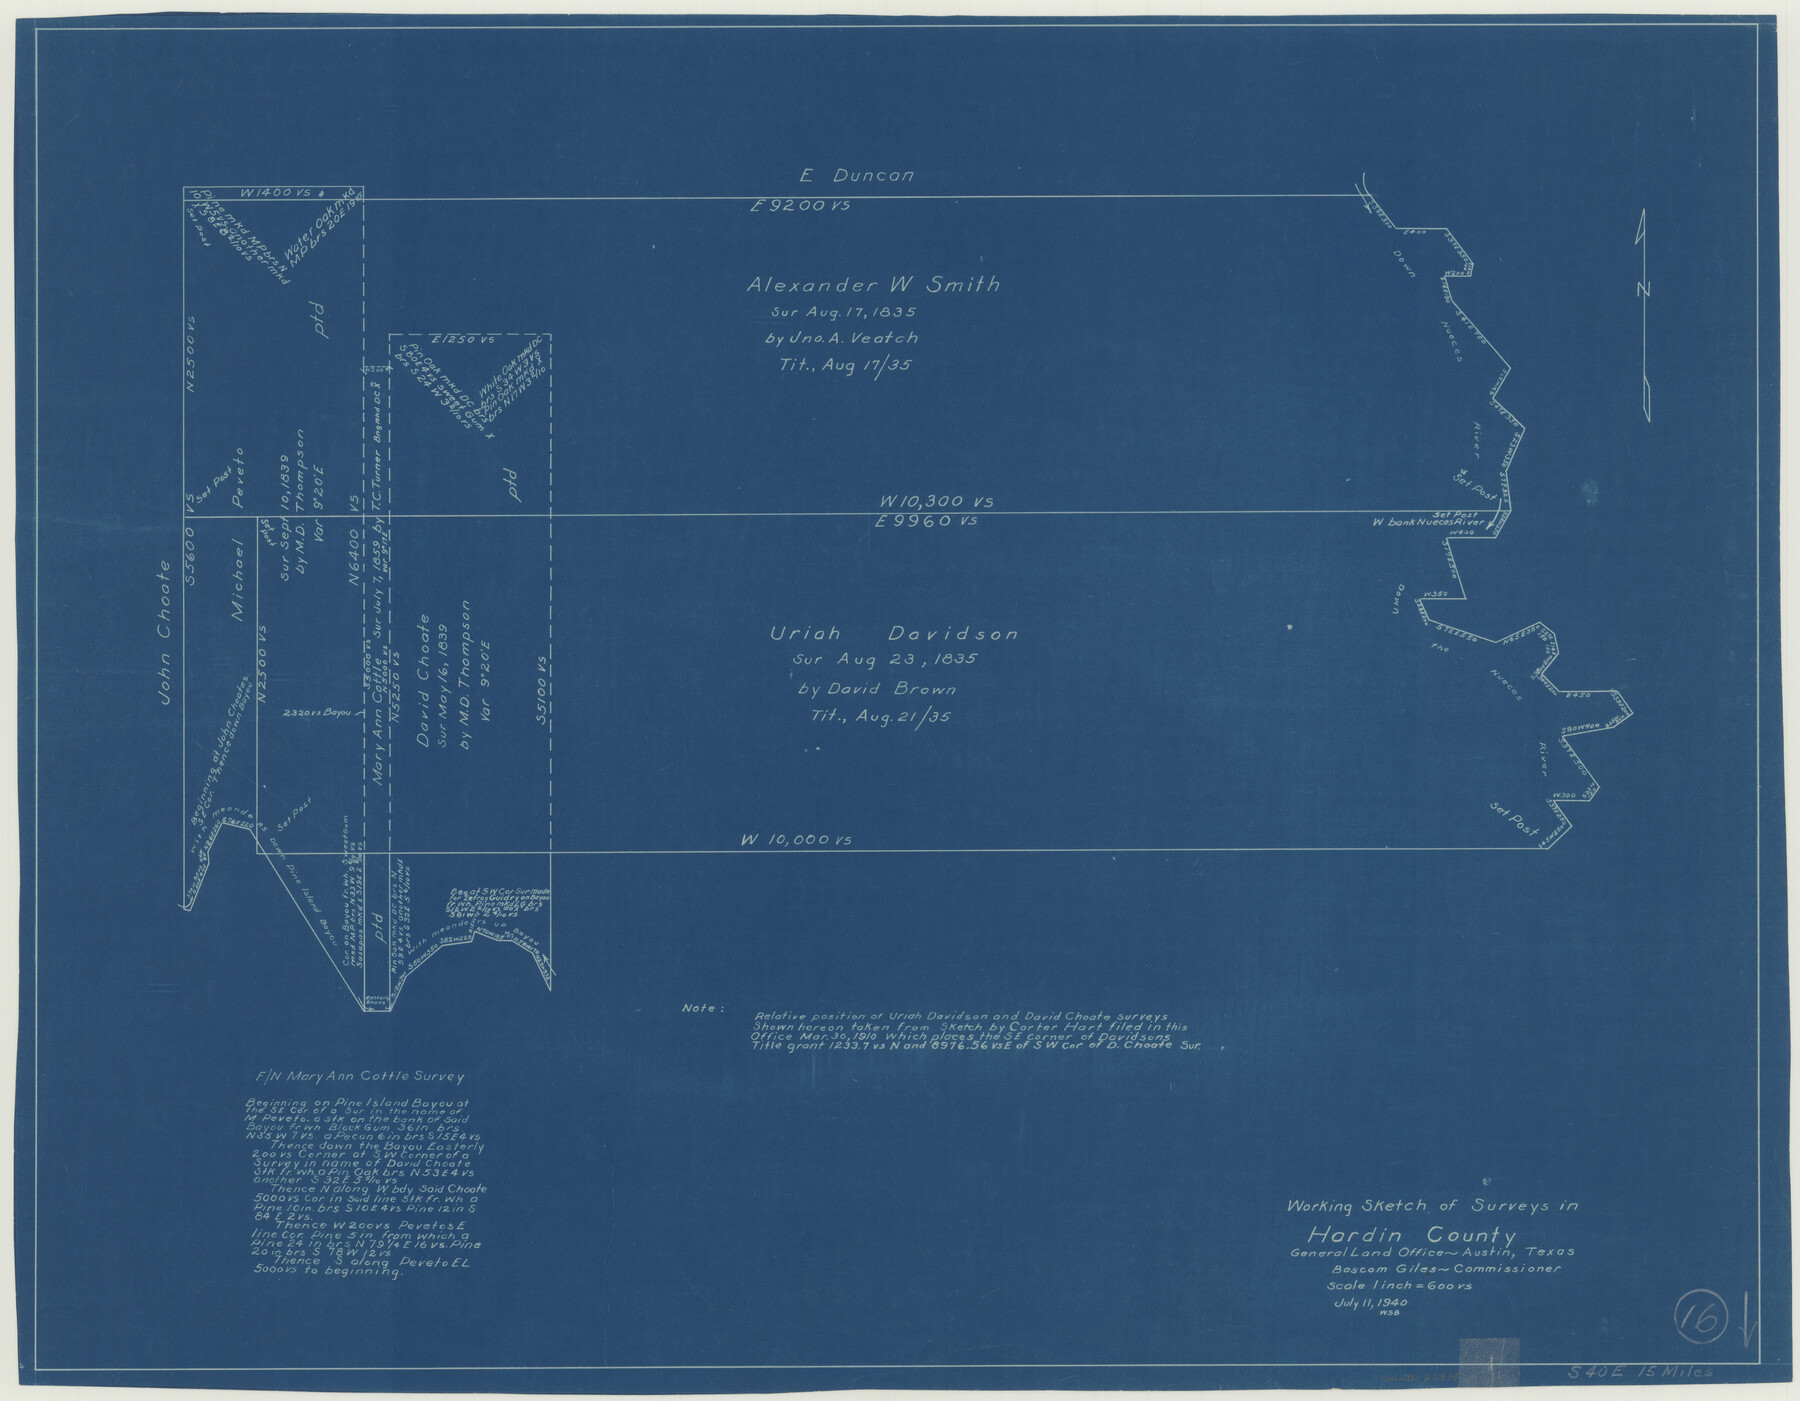 63414, Hardin County Working Sketch 16, General Map Collection